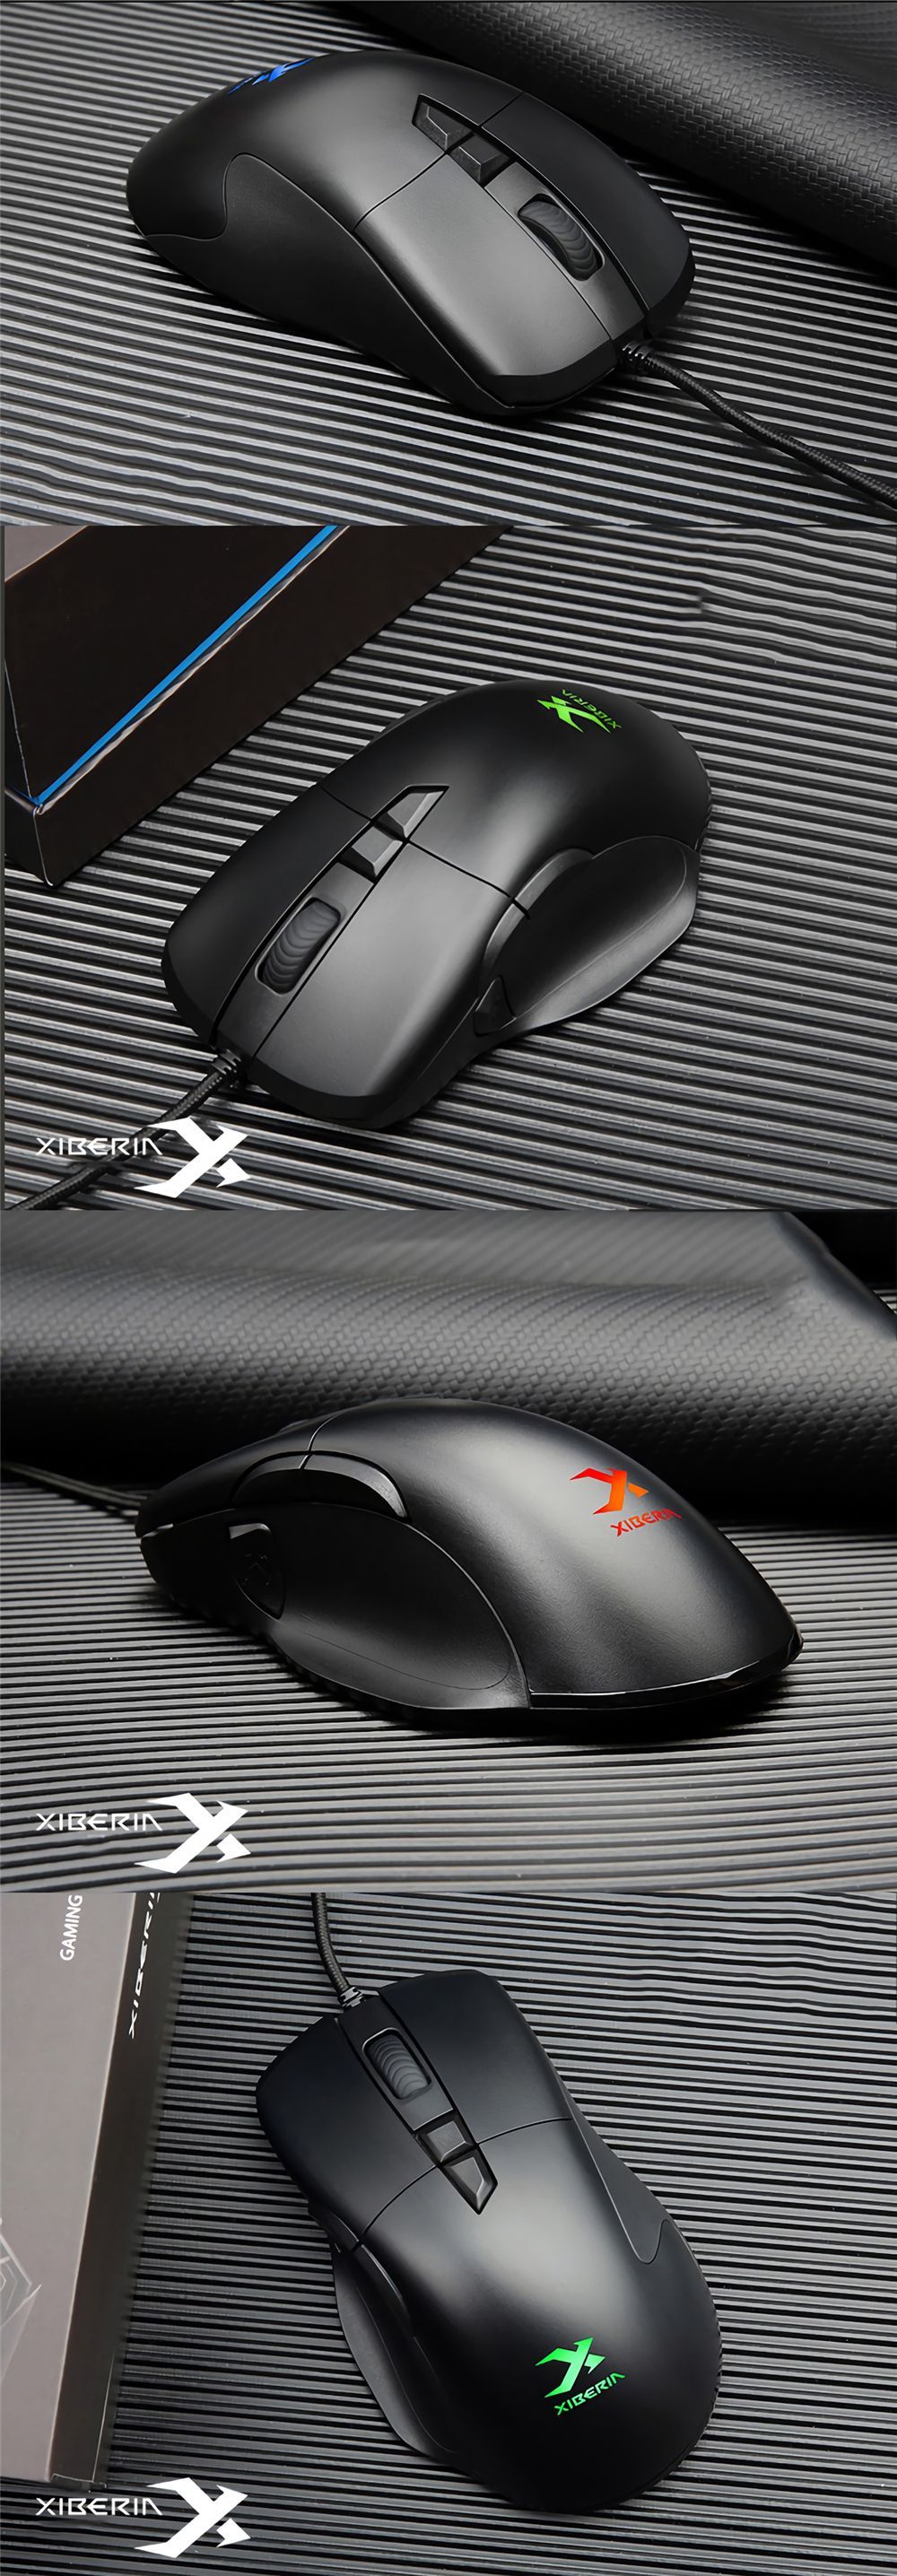 XIBERIA-XT100-Wied-Game-Mouse-6200DPI-Mechanical-Gaming-Mouse-USB-Wired-Gamer-Mice-for-Desktop-Compu-1705654